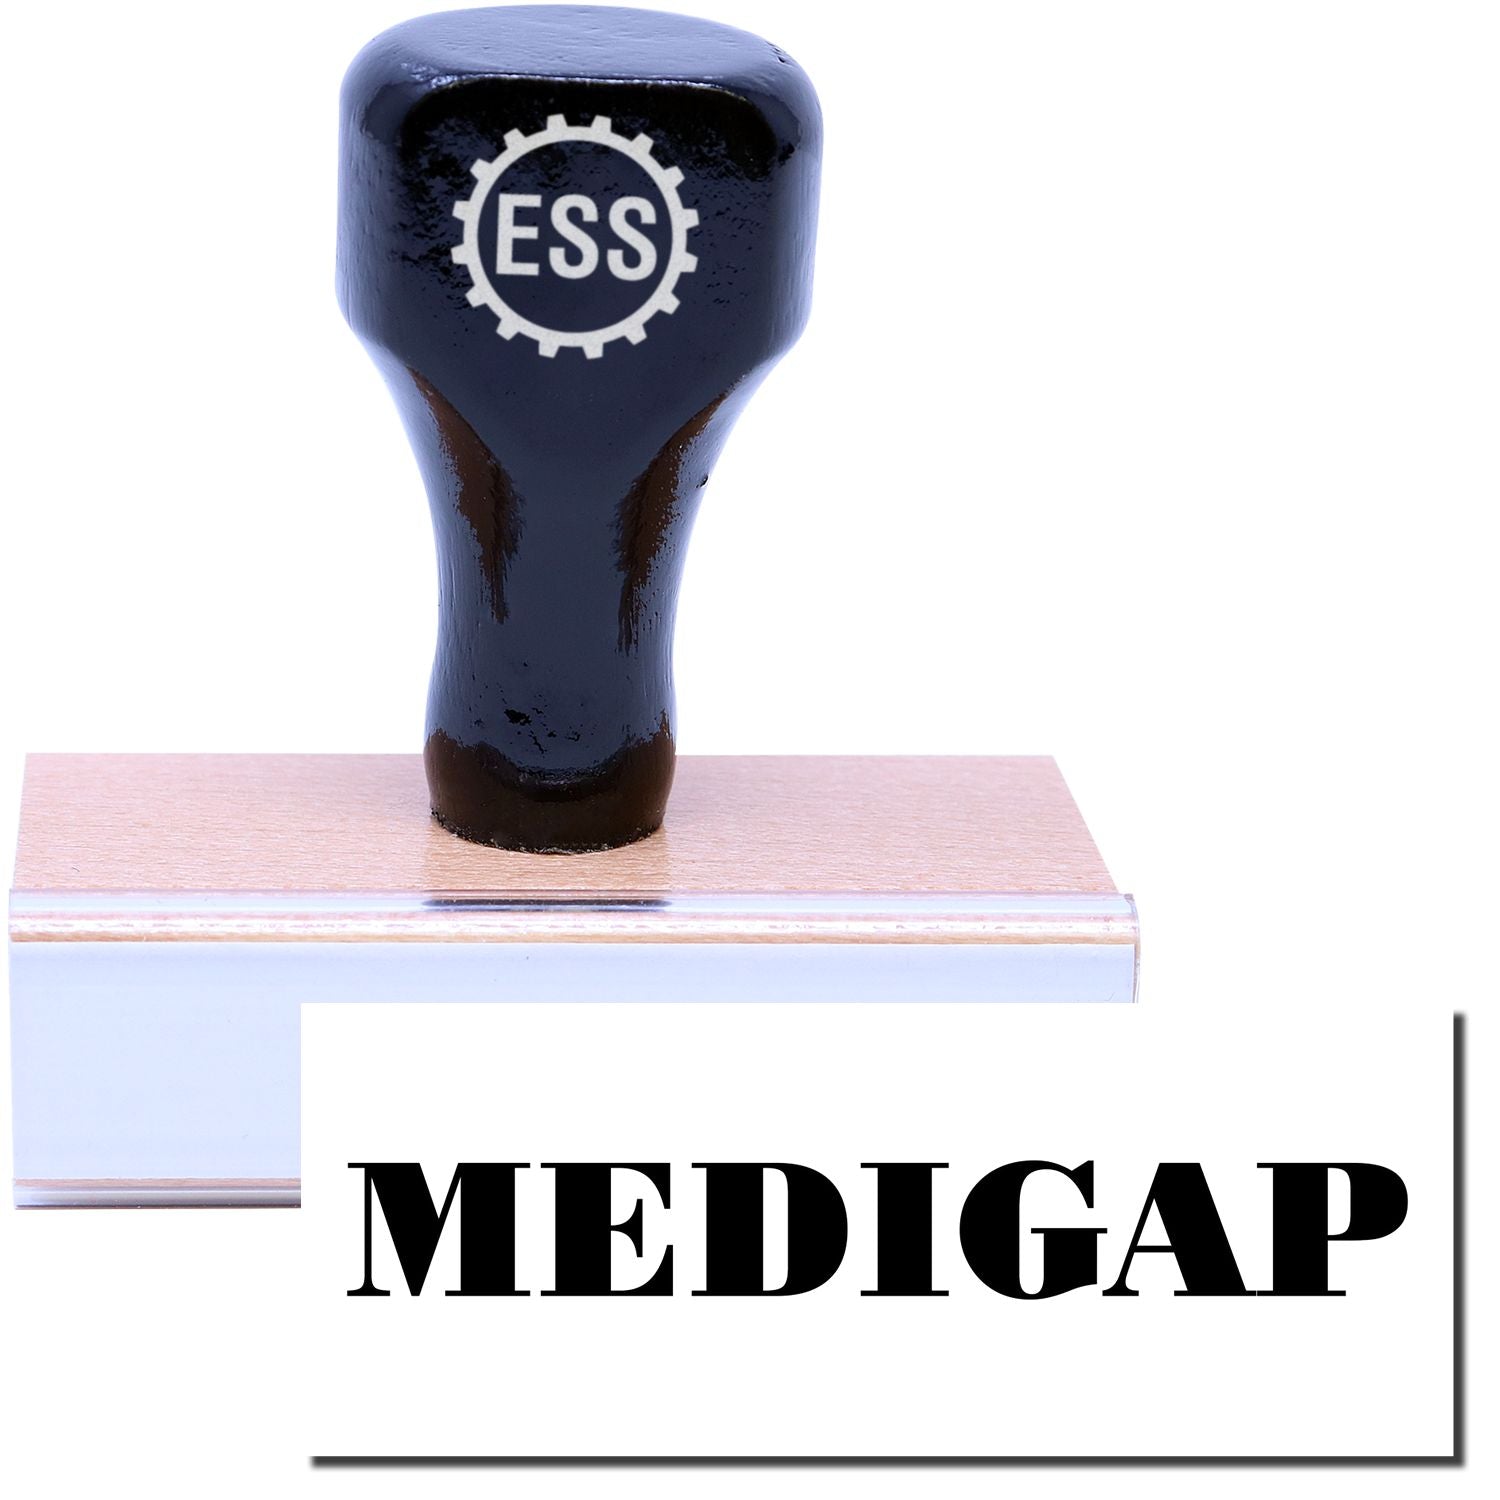 A stock office rubber stamp with a stamped image showing how the text "MEDIGAP" in a large font is displayed after stamping.